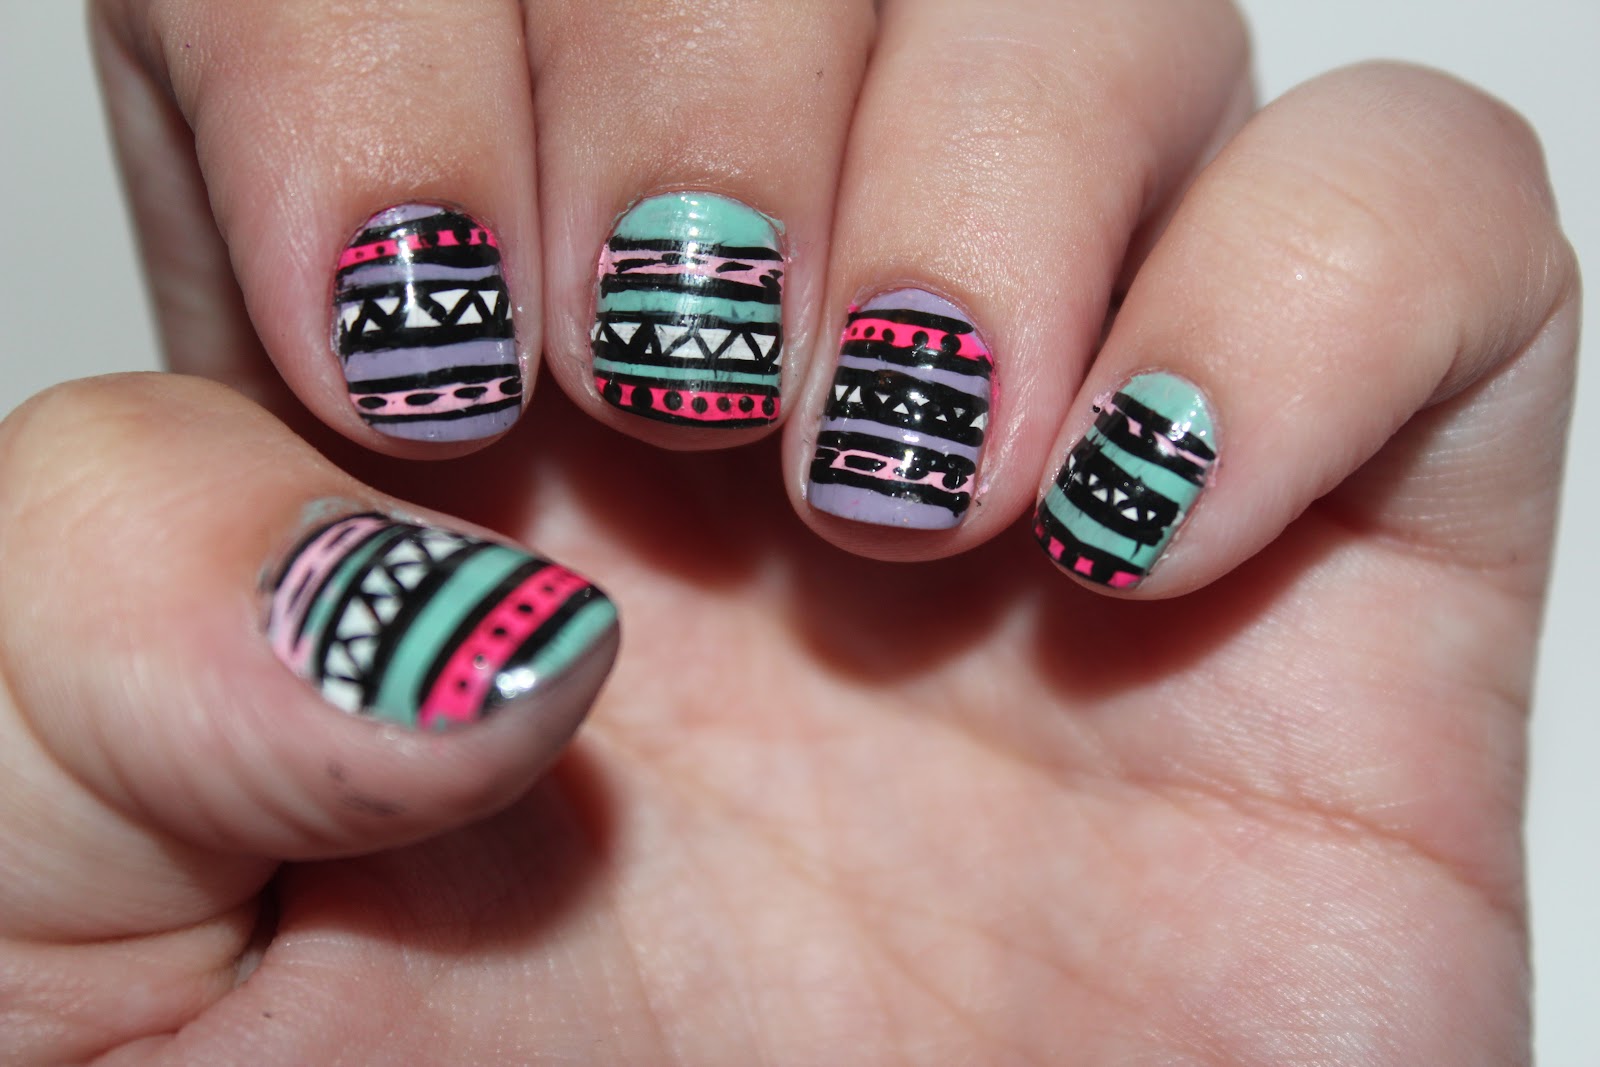 5. Aztec Nail Art Tutorial - Step by Step Guide - wide 9